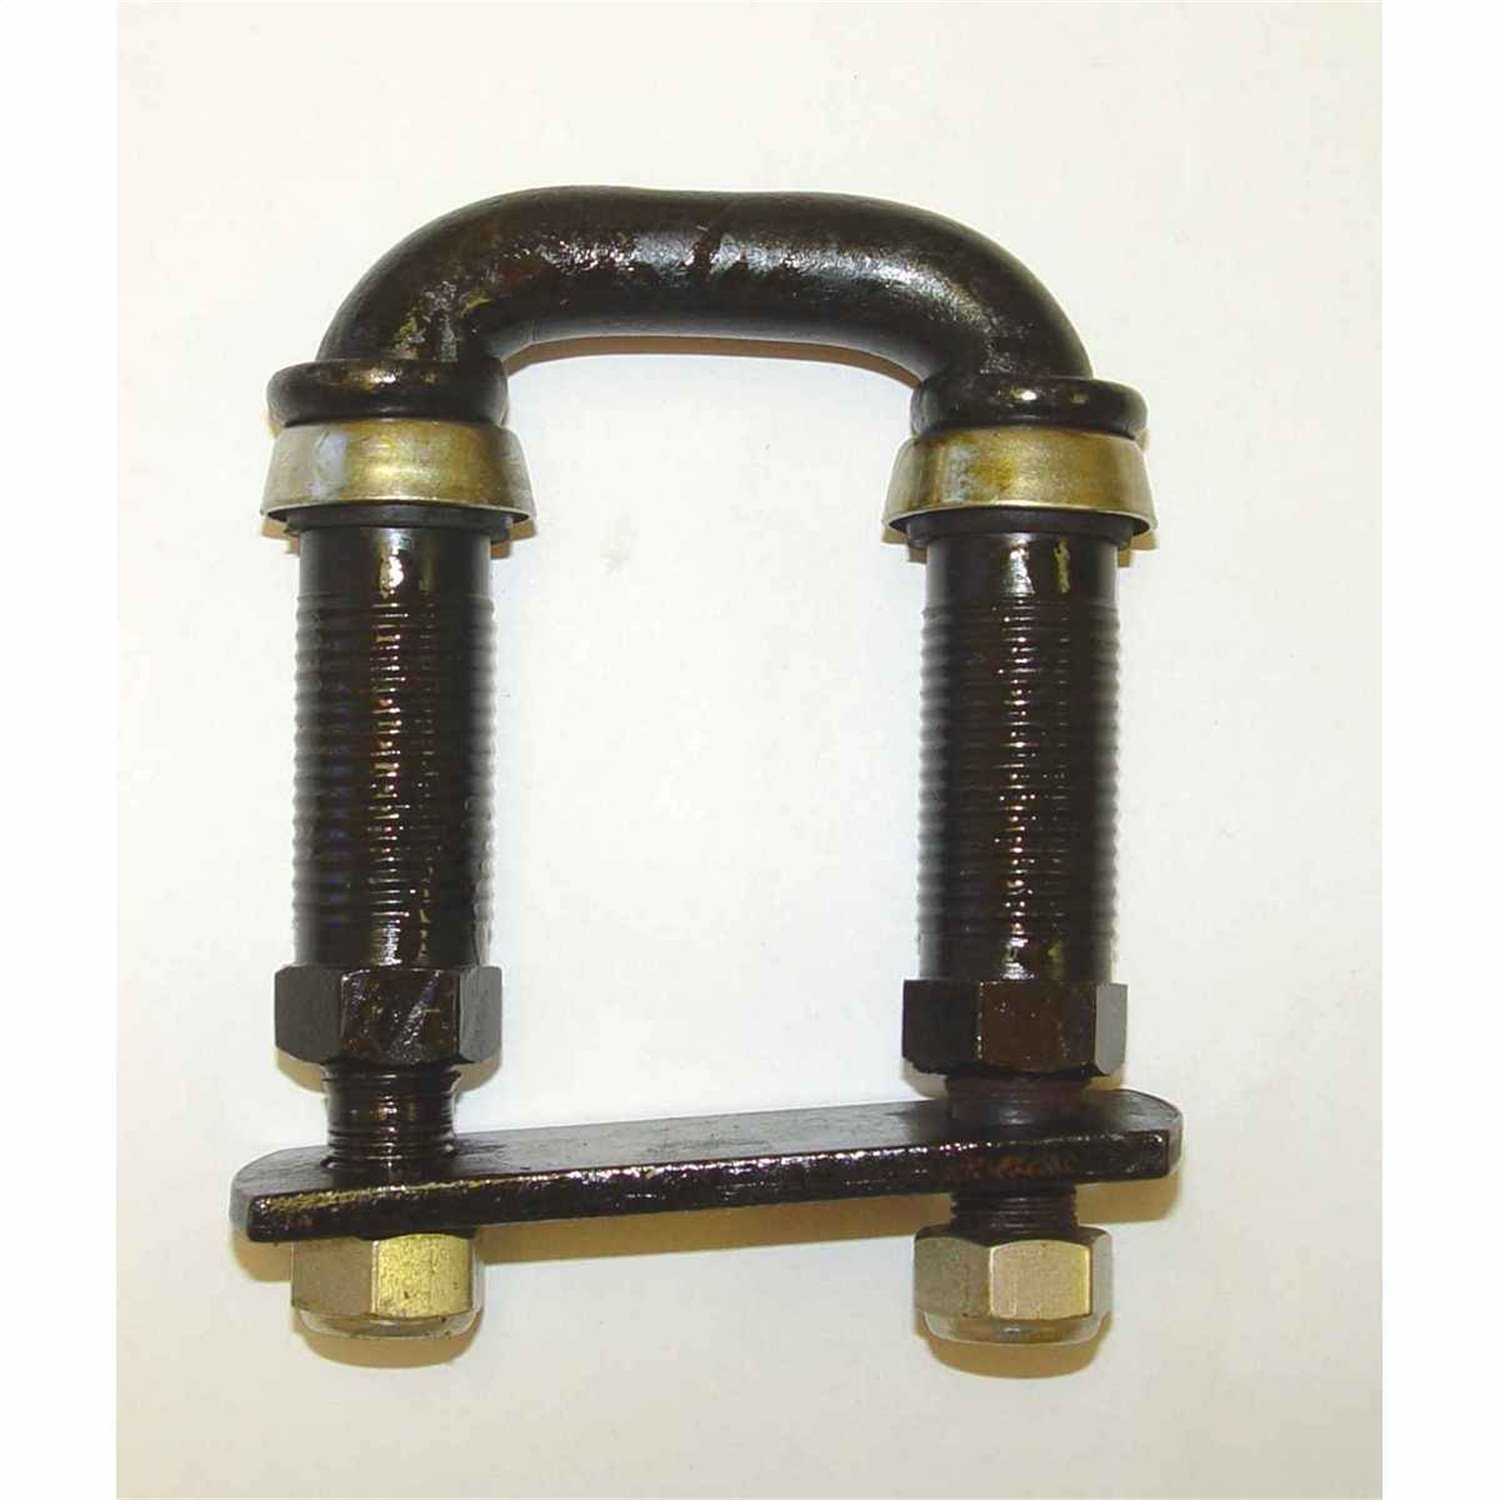 18270.14 Replacement Leaf Spring Shackle Kit for 1954-1957 Jeep Willys [U-Style, Right Hand Thread]